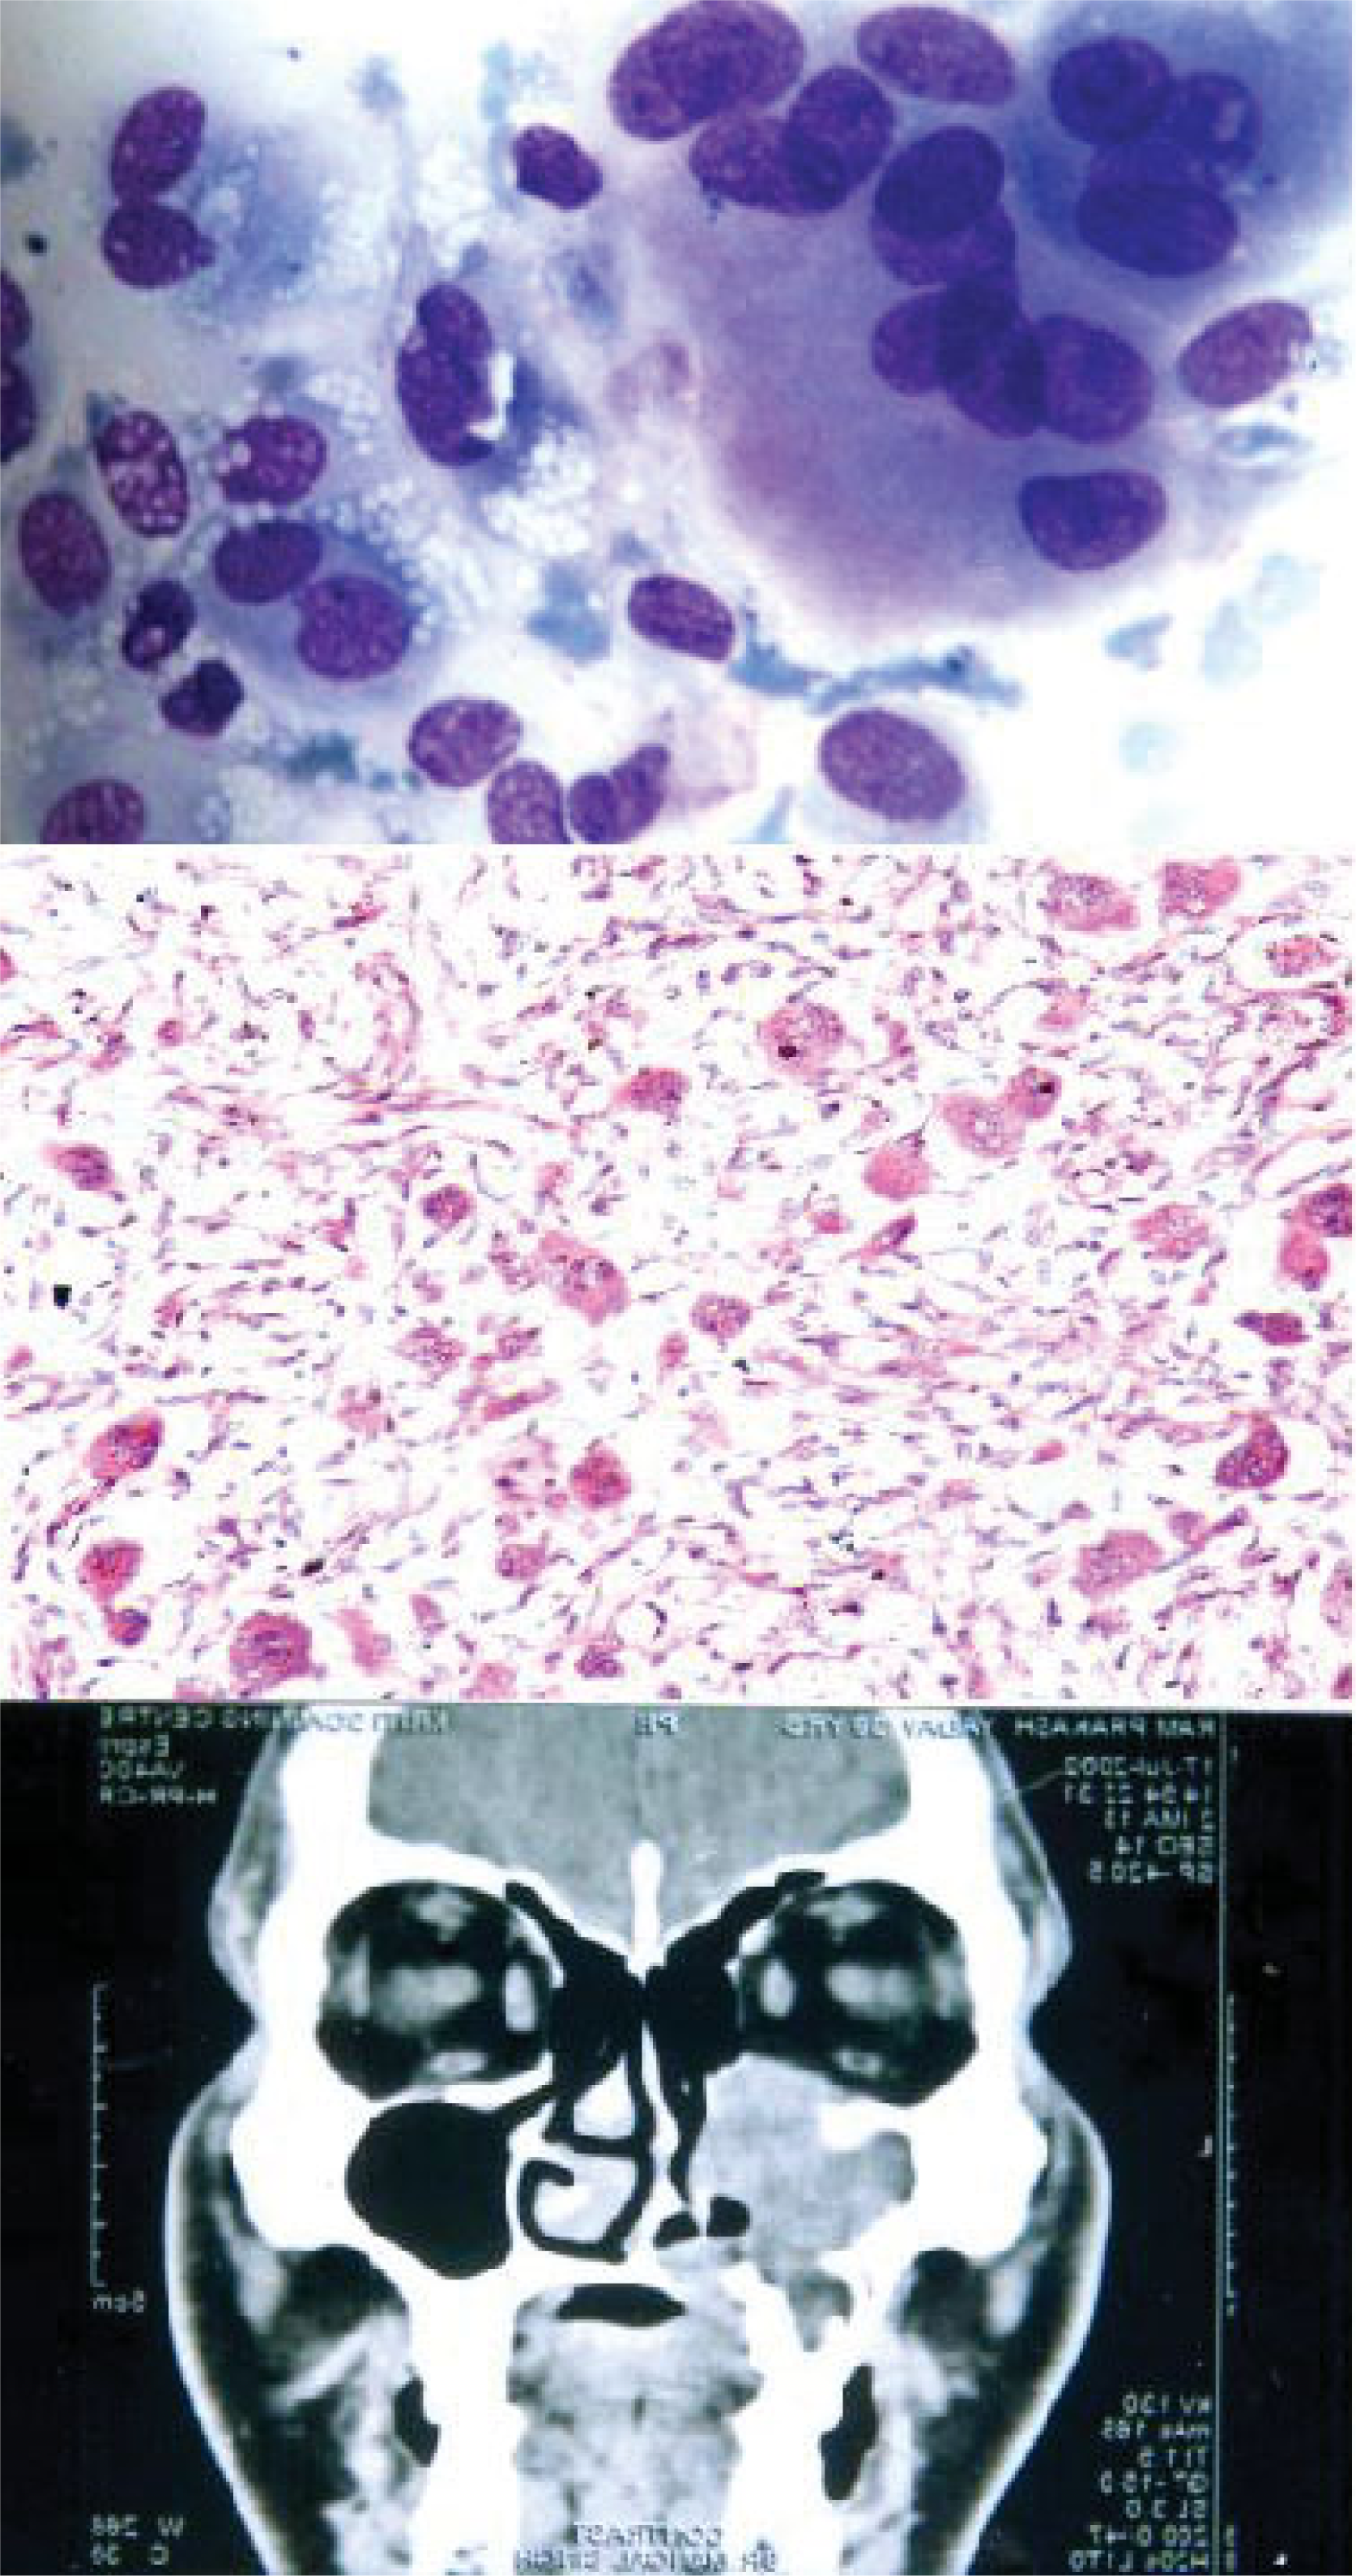 1. Giant cell tumor like picture of giant cell reparative granuloma [MGG; ×400]. 2. Giant cell reparative granuloma: histological picture showing giant cells lying in loose stroma. [H&E ×200]. 3. CT scan of giant cell reparative granuloma showing a mass in right maxillary sinus with extension into the adjacent areas.